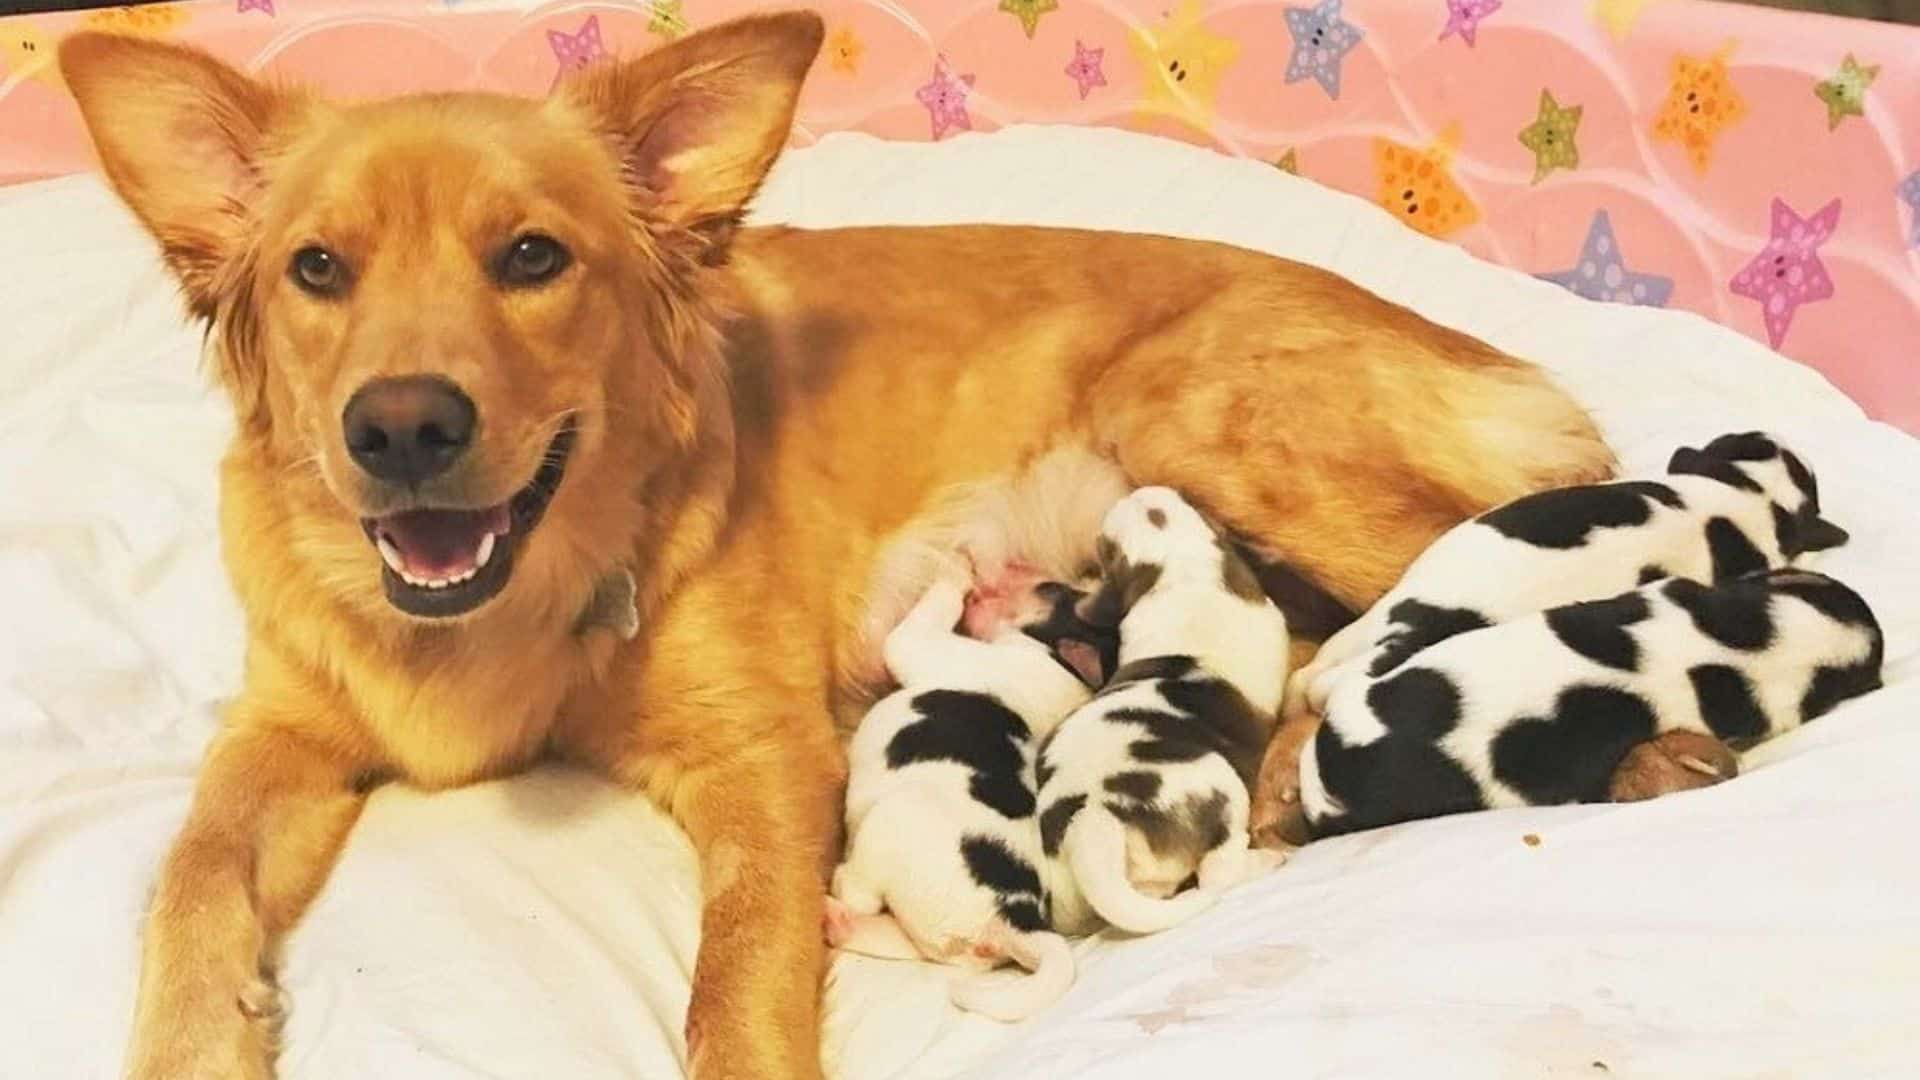 Rosie, The Golden Retriever, Defies All Expectations With Her ‘Mini-Cow’ Litter